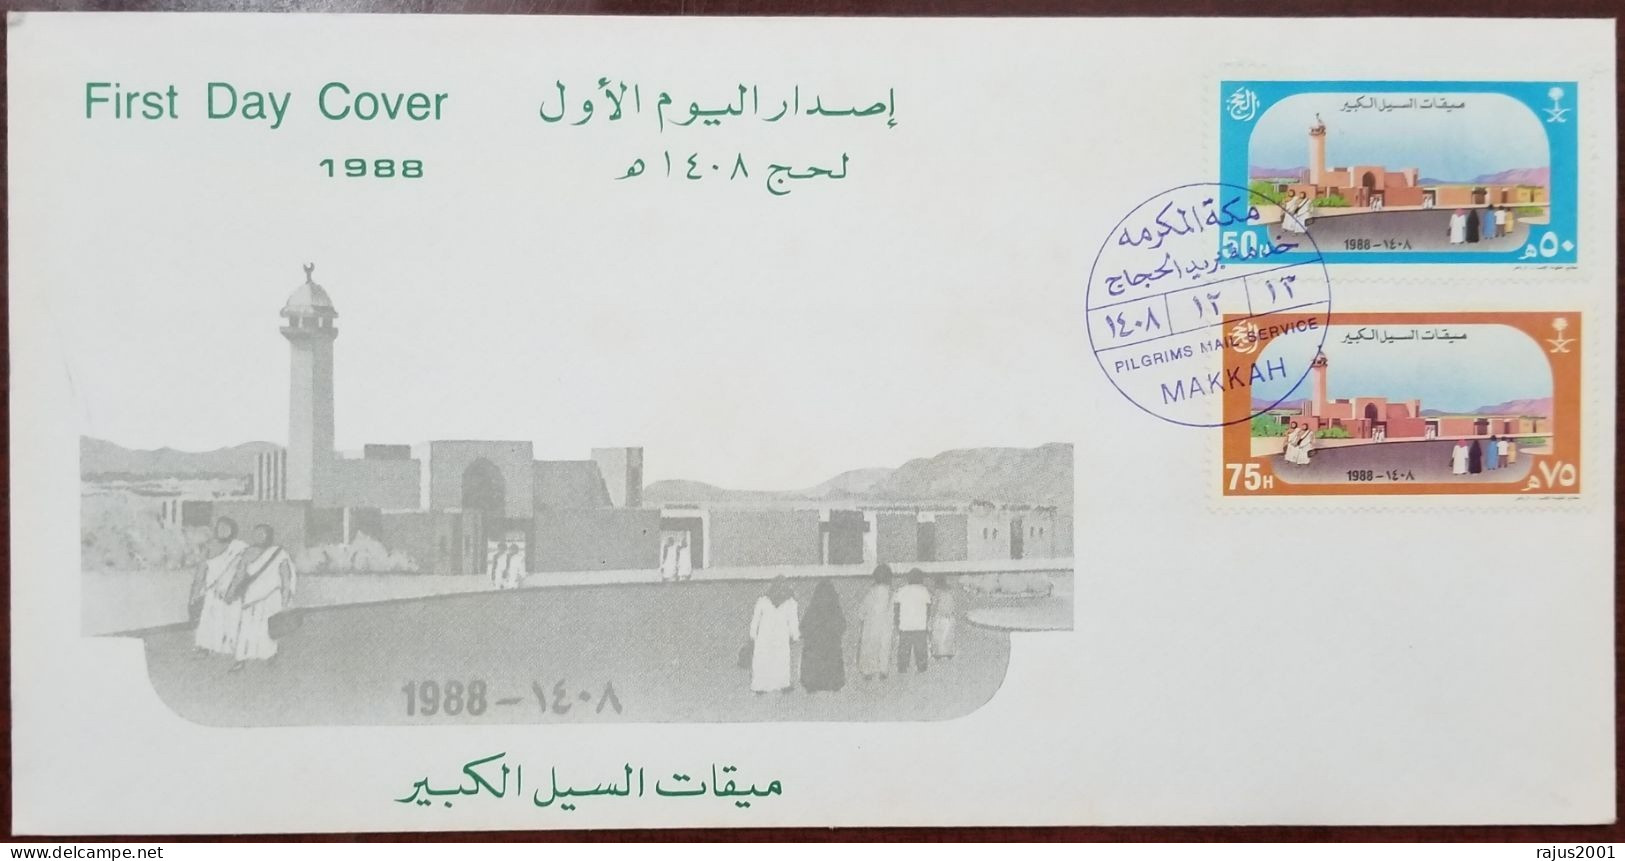 Hajj Pilgrims Pilgrimage Mail Service Hajj Islamic 4 Different Special Place Cancellation Mosque Set Of 4 FDC Cover RARE - Islam